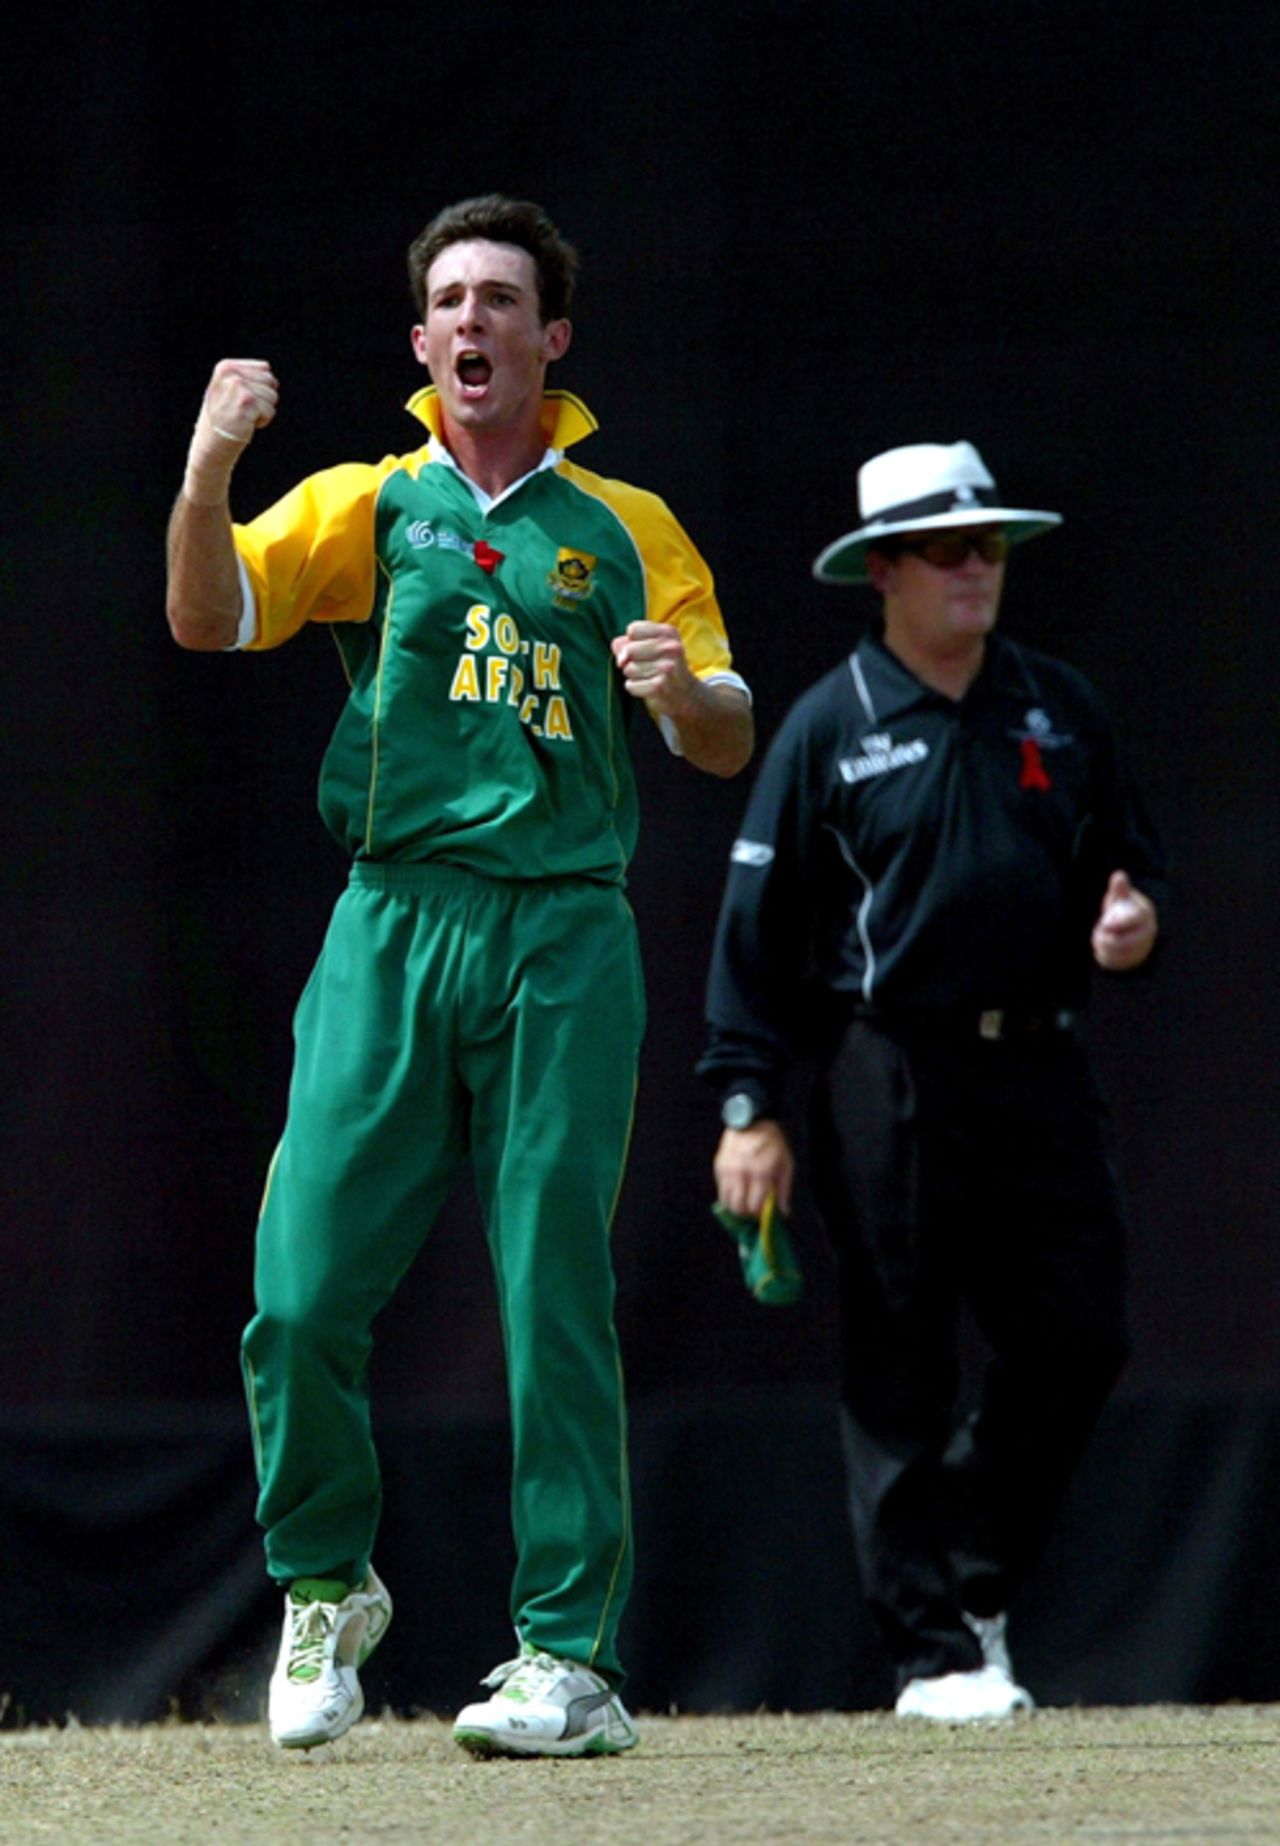 Pieter Malan is fired up after dismissing Virat Kohli, India v South Africa, Under-19 World Cup final, Kuala Lumpur, March 2, 2008 
